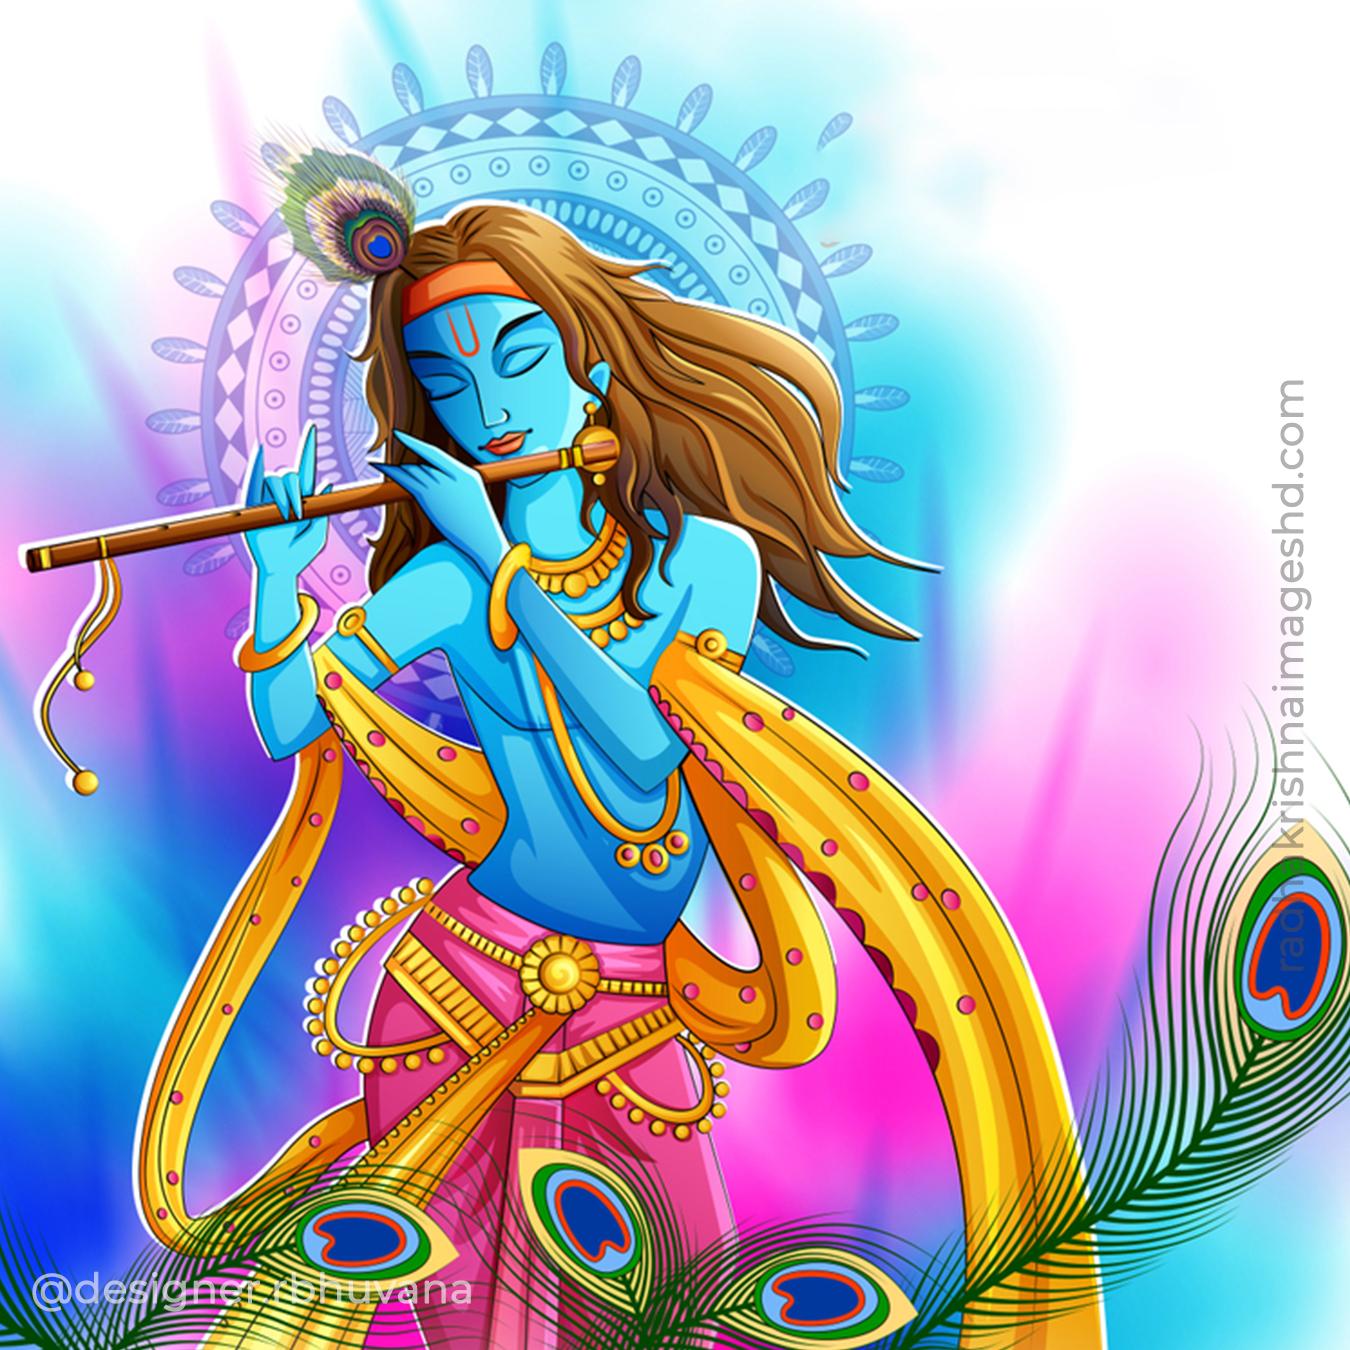 45 Best Krishna With Flute HD Wallpapers For Free Download - 200+ Radha Krishna  HD Images